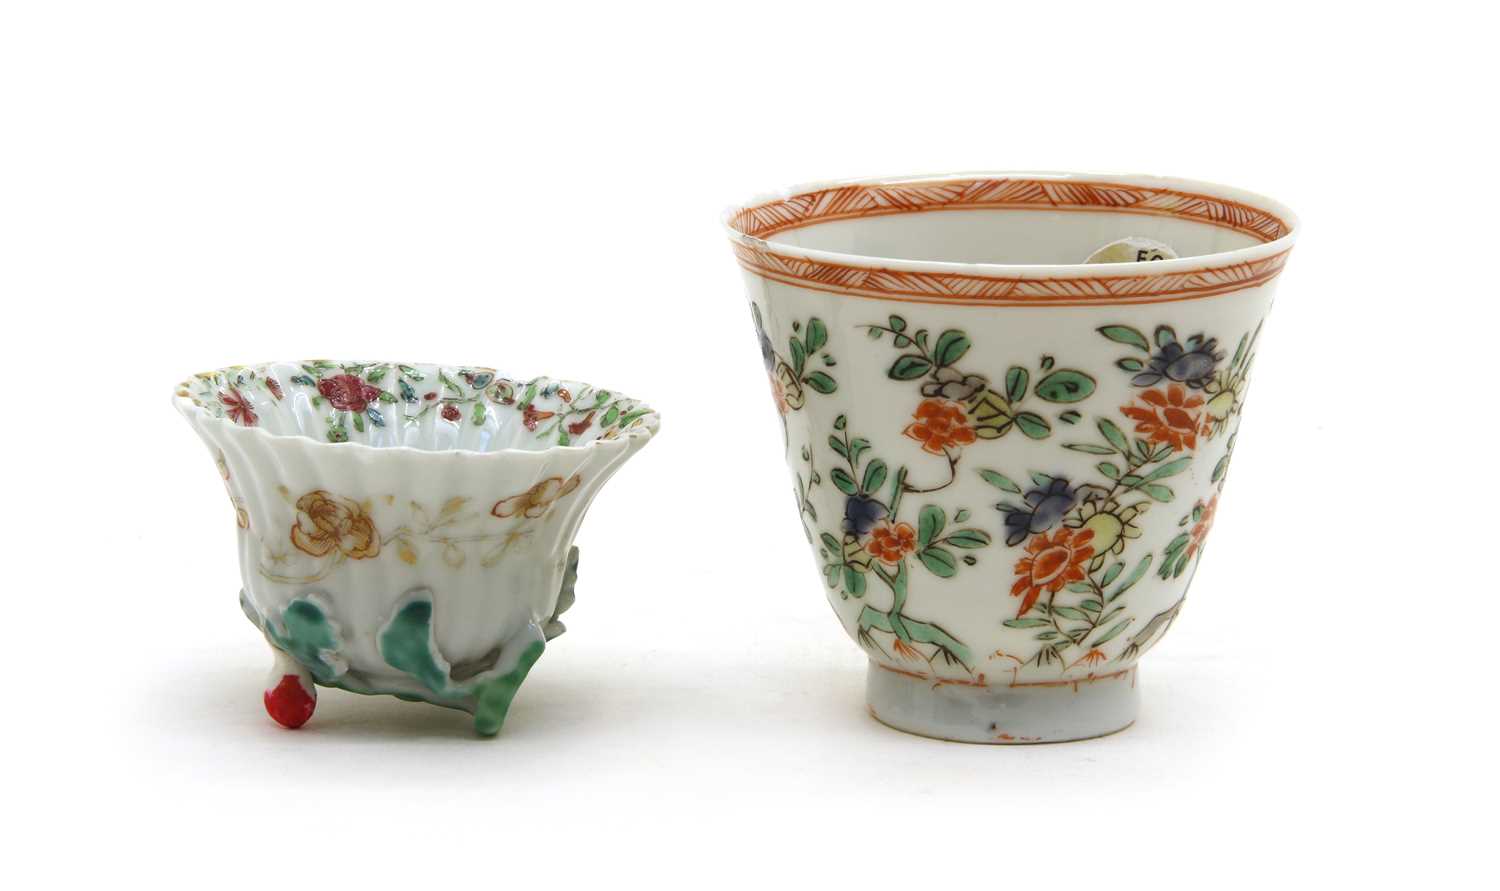 Lot 85 - A Chinese Wucai Cup